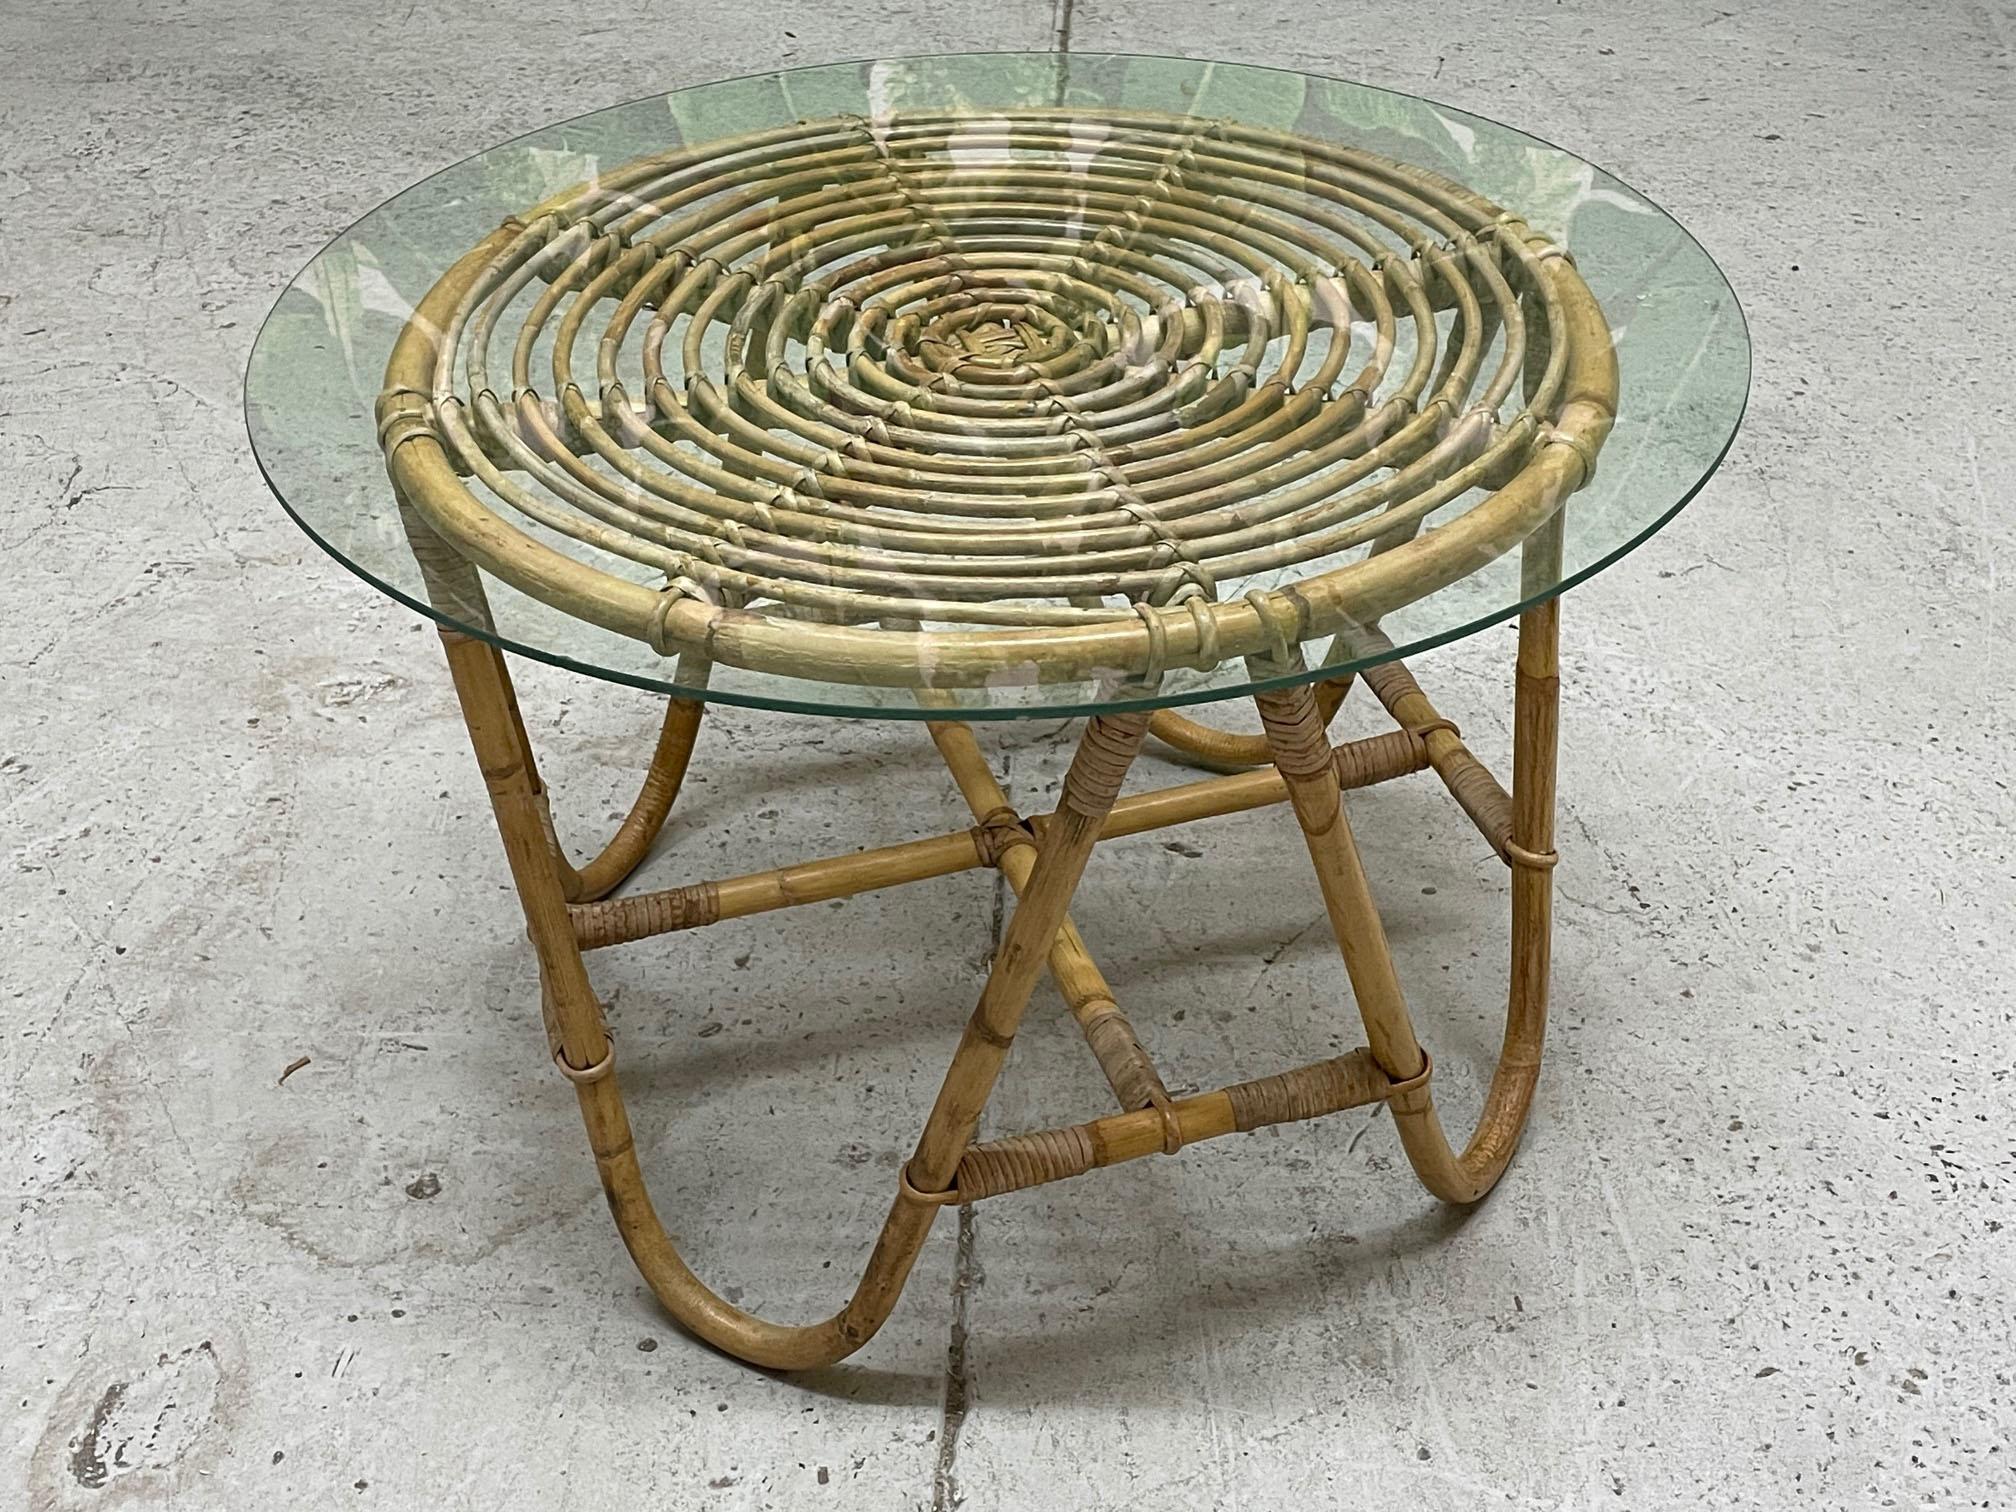 Vintage rattan side table features boho chic styling and a glass top. Good condition with minor imperfections consistent with age. May exhibit scuffs, marks, or wear, see photos for details.

 